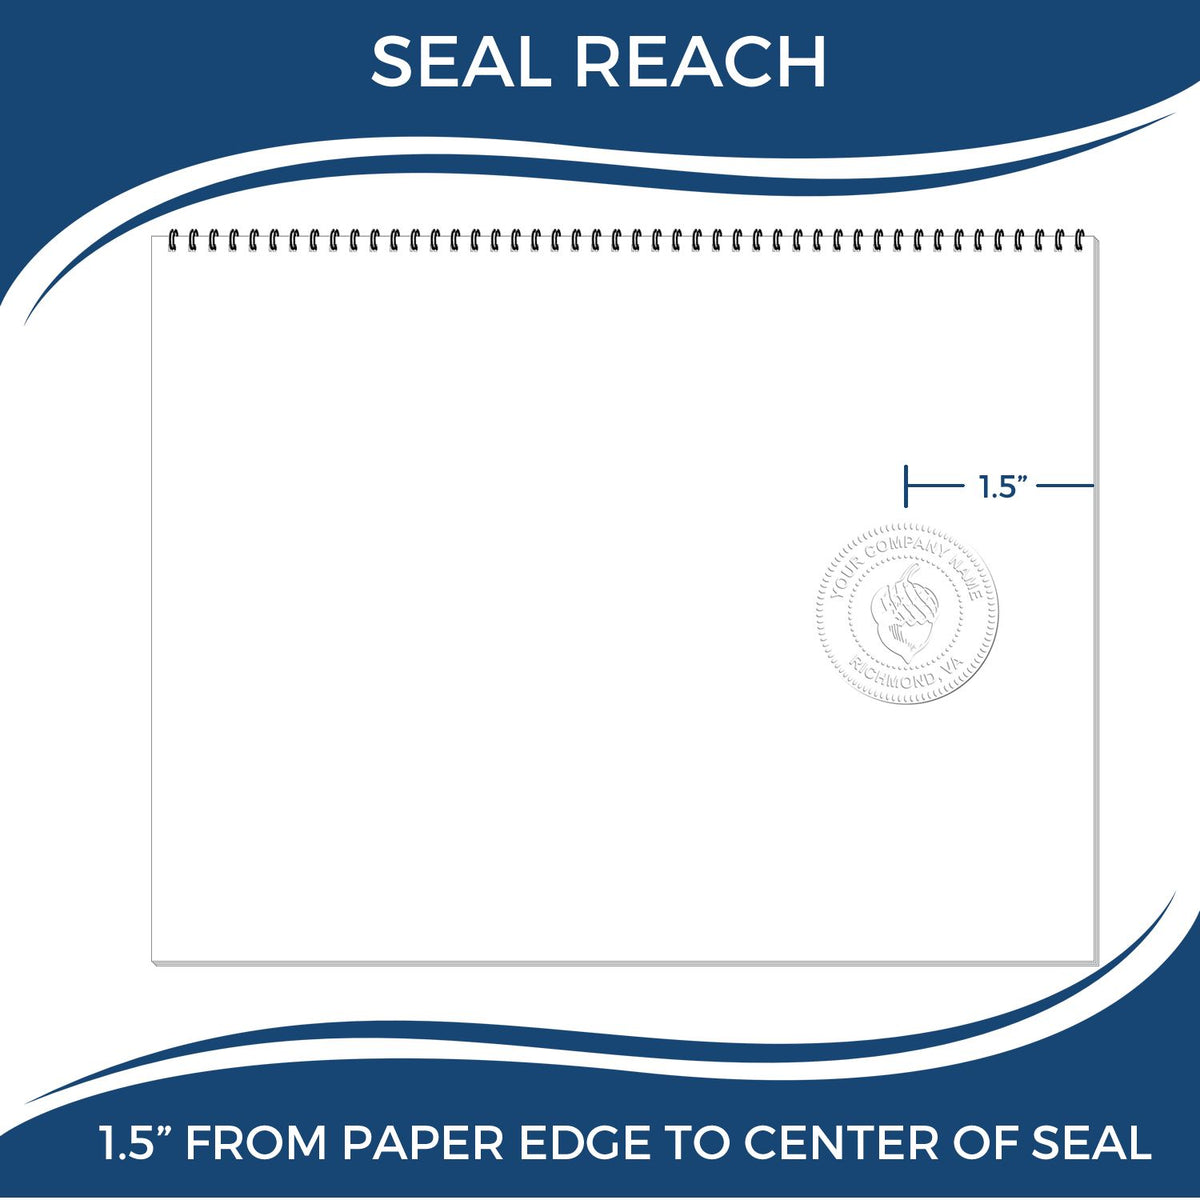 An infographic showing the seal reach which is represented by a ruler and a miniature seal image of the North Dakota Geologist Desk Seal